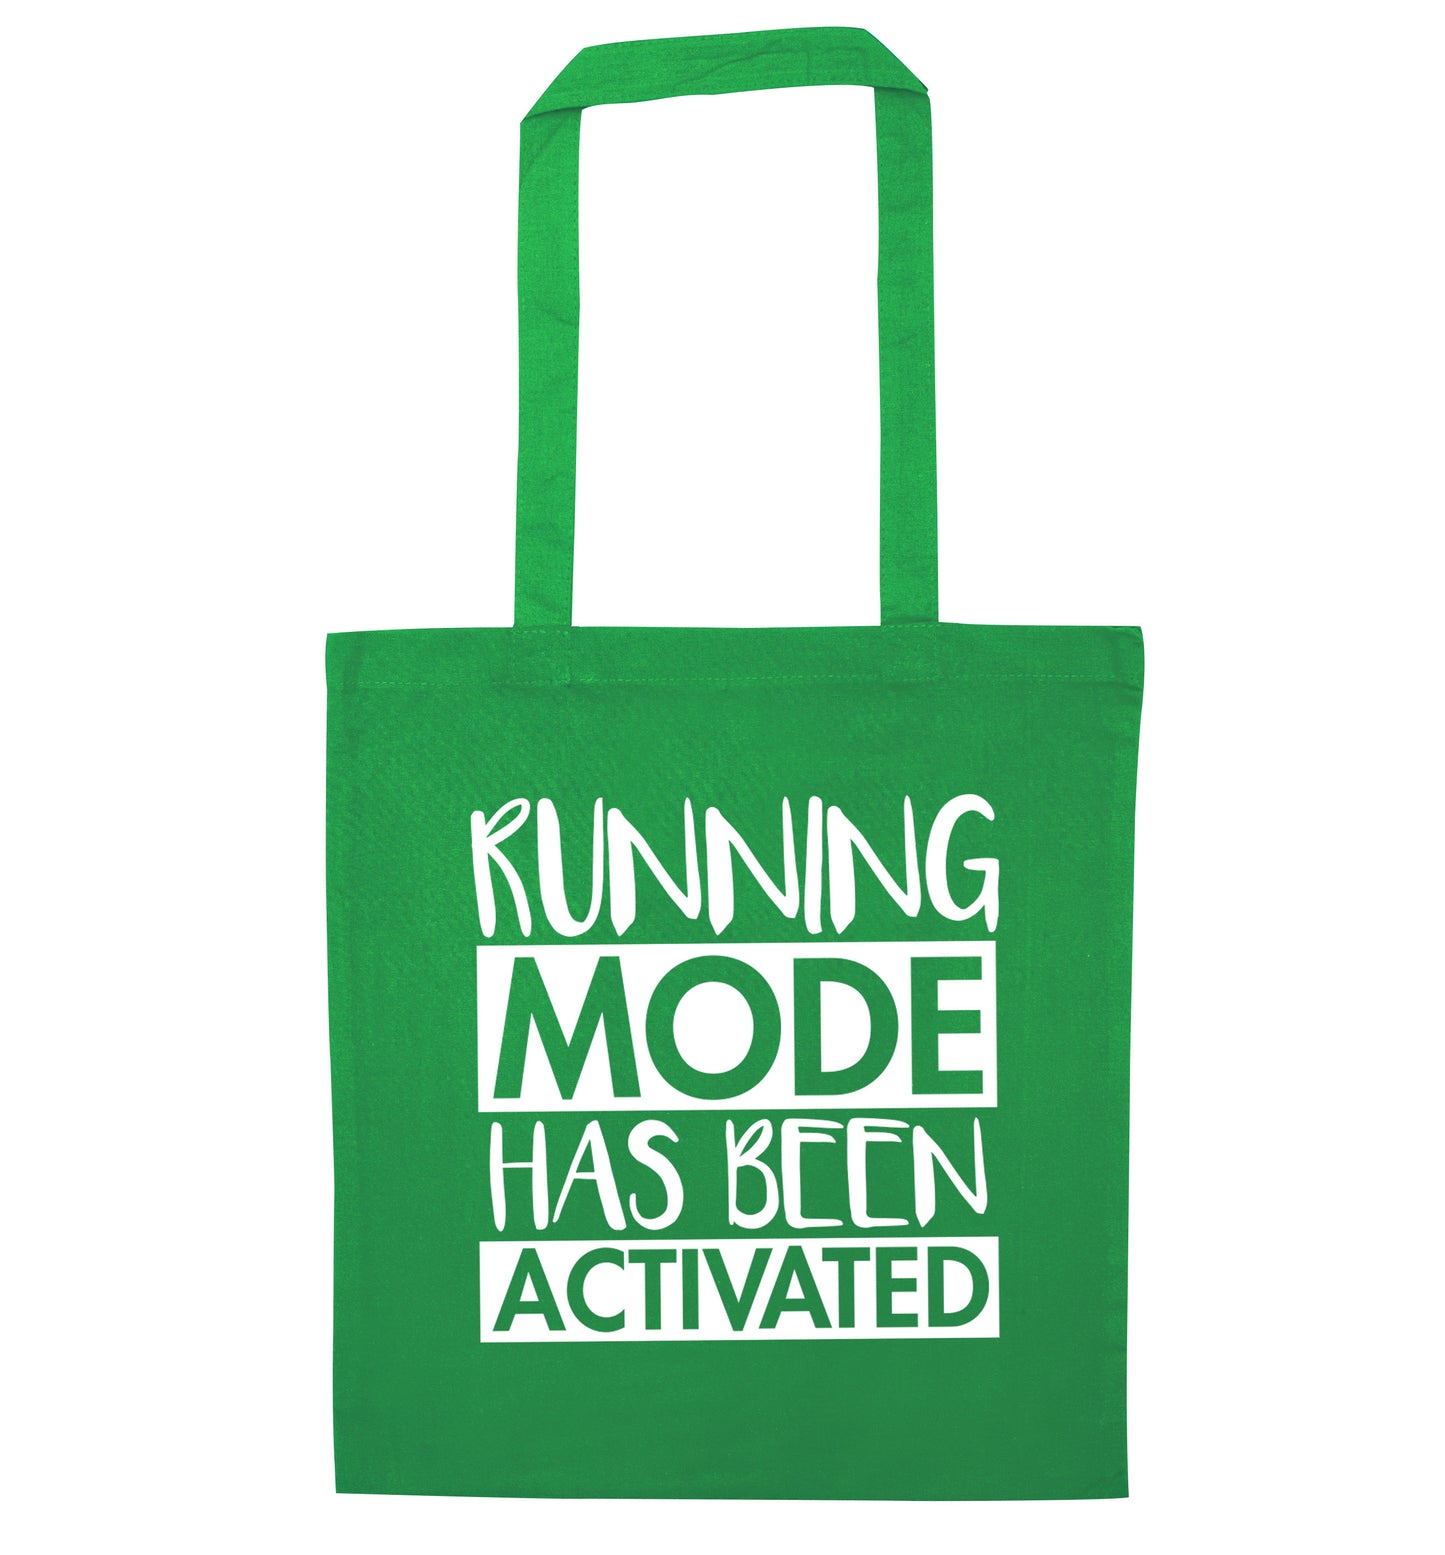 Running mode activated green tote bag